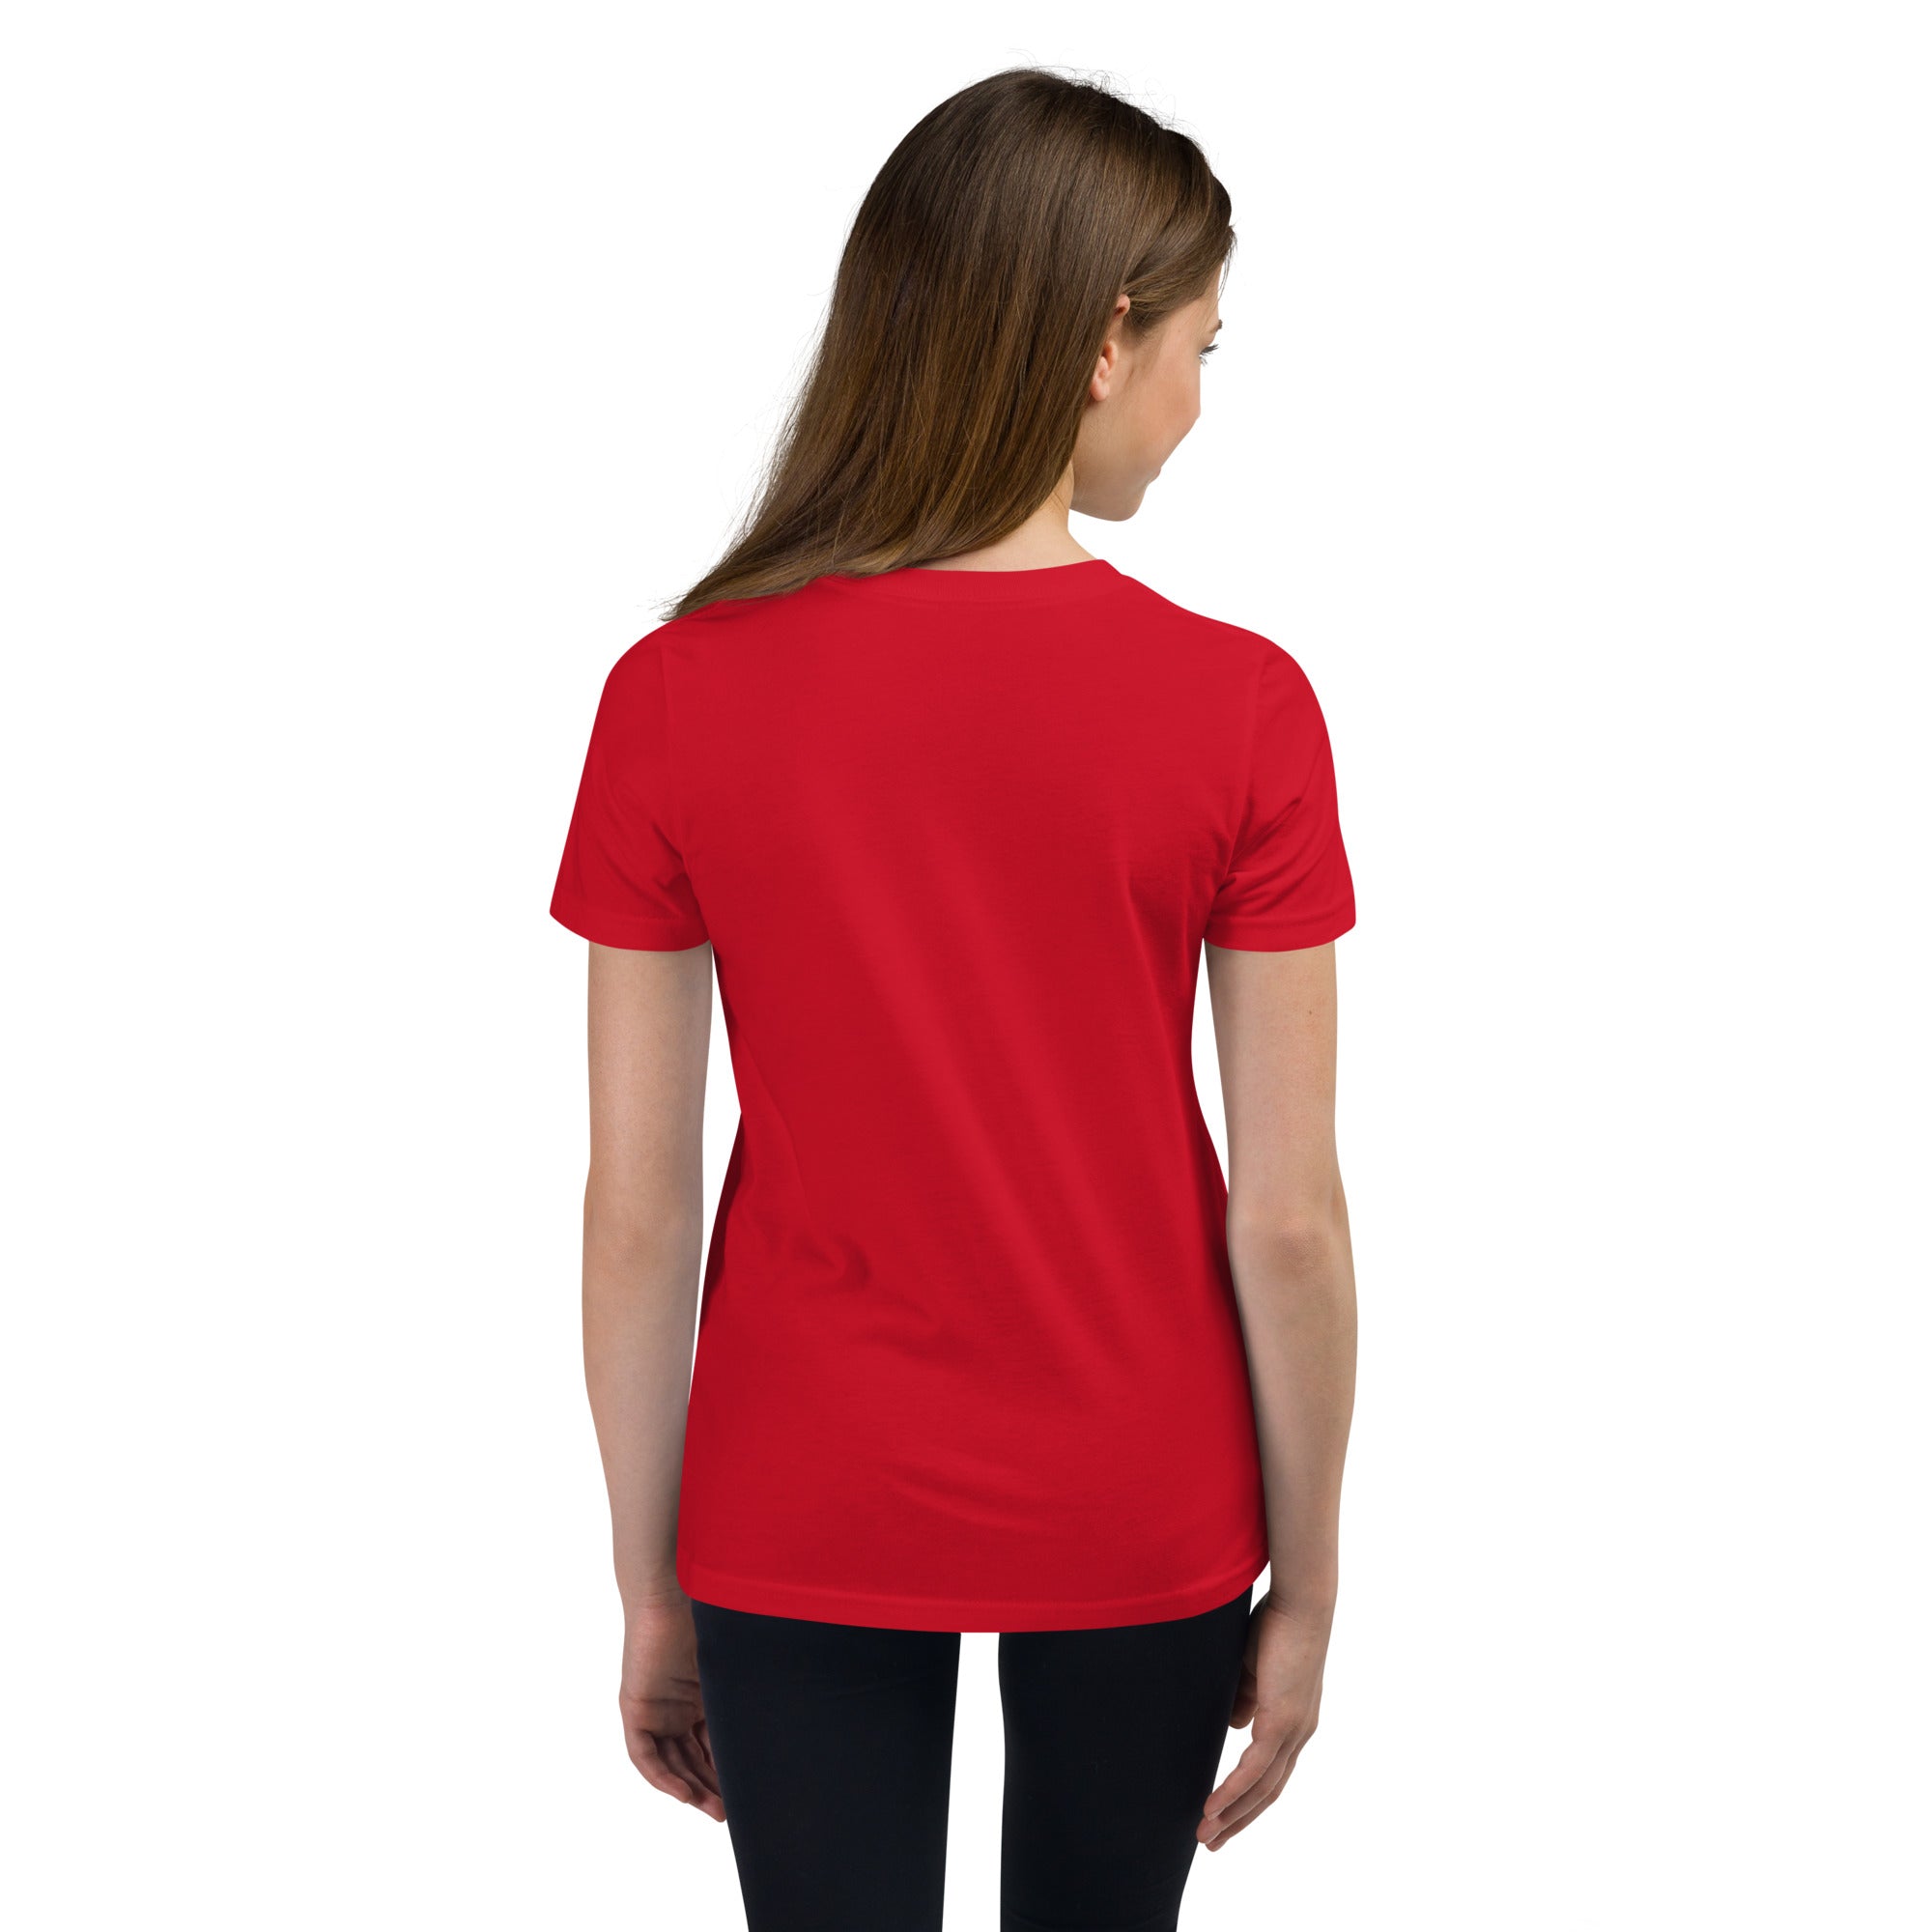 Mount Pleasant Logo W - Red Youth Short Sleeve T-Shirt